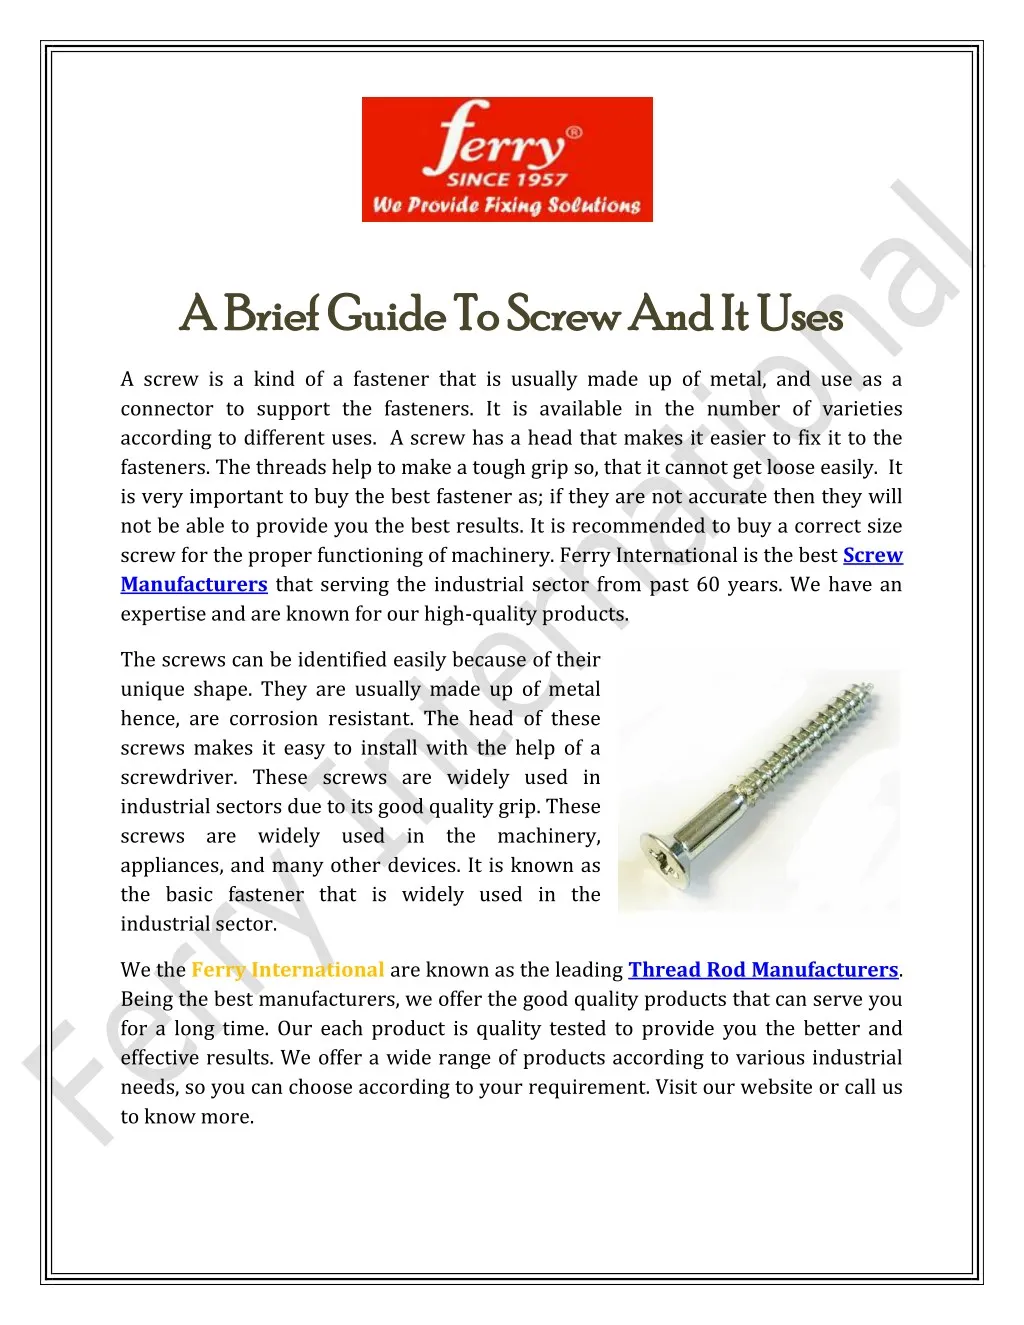 a a br bri ief guide ef guide to to screw